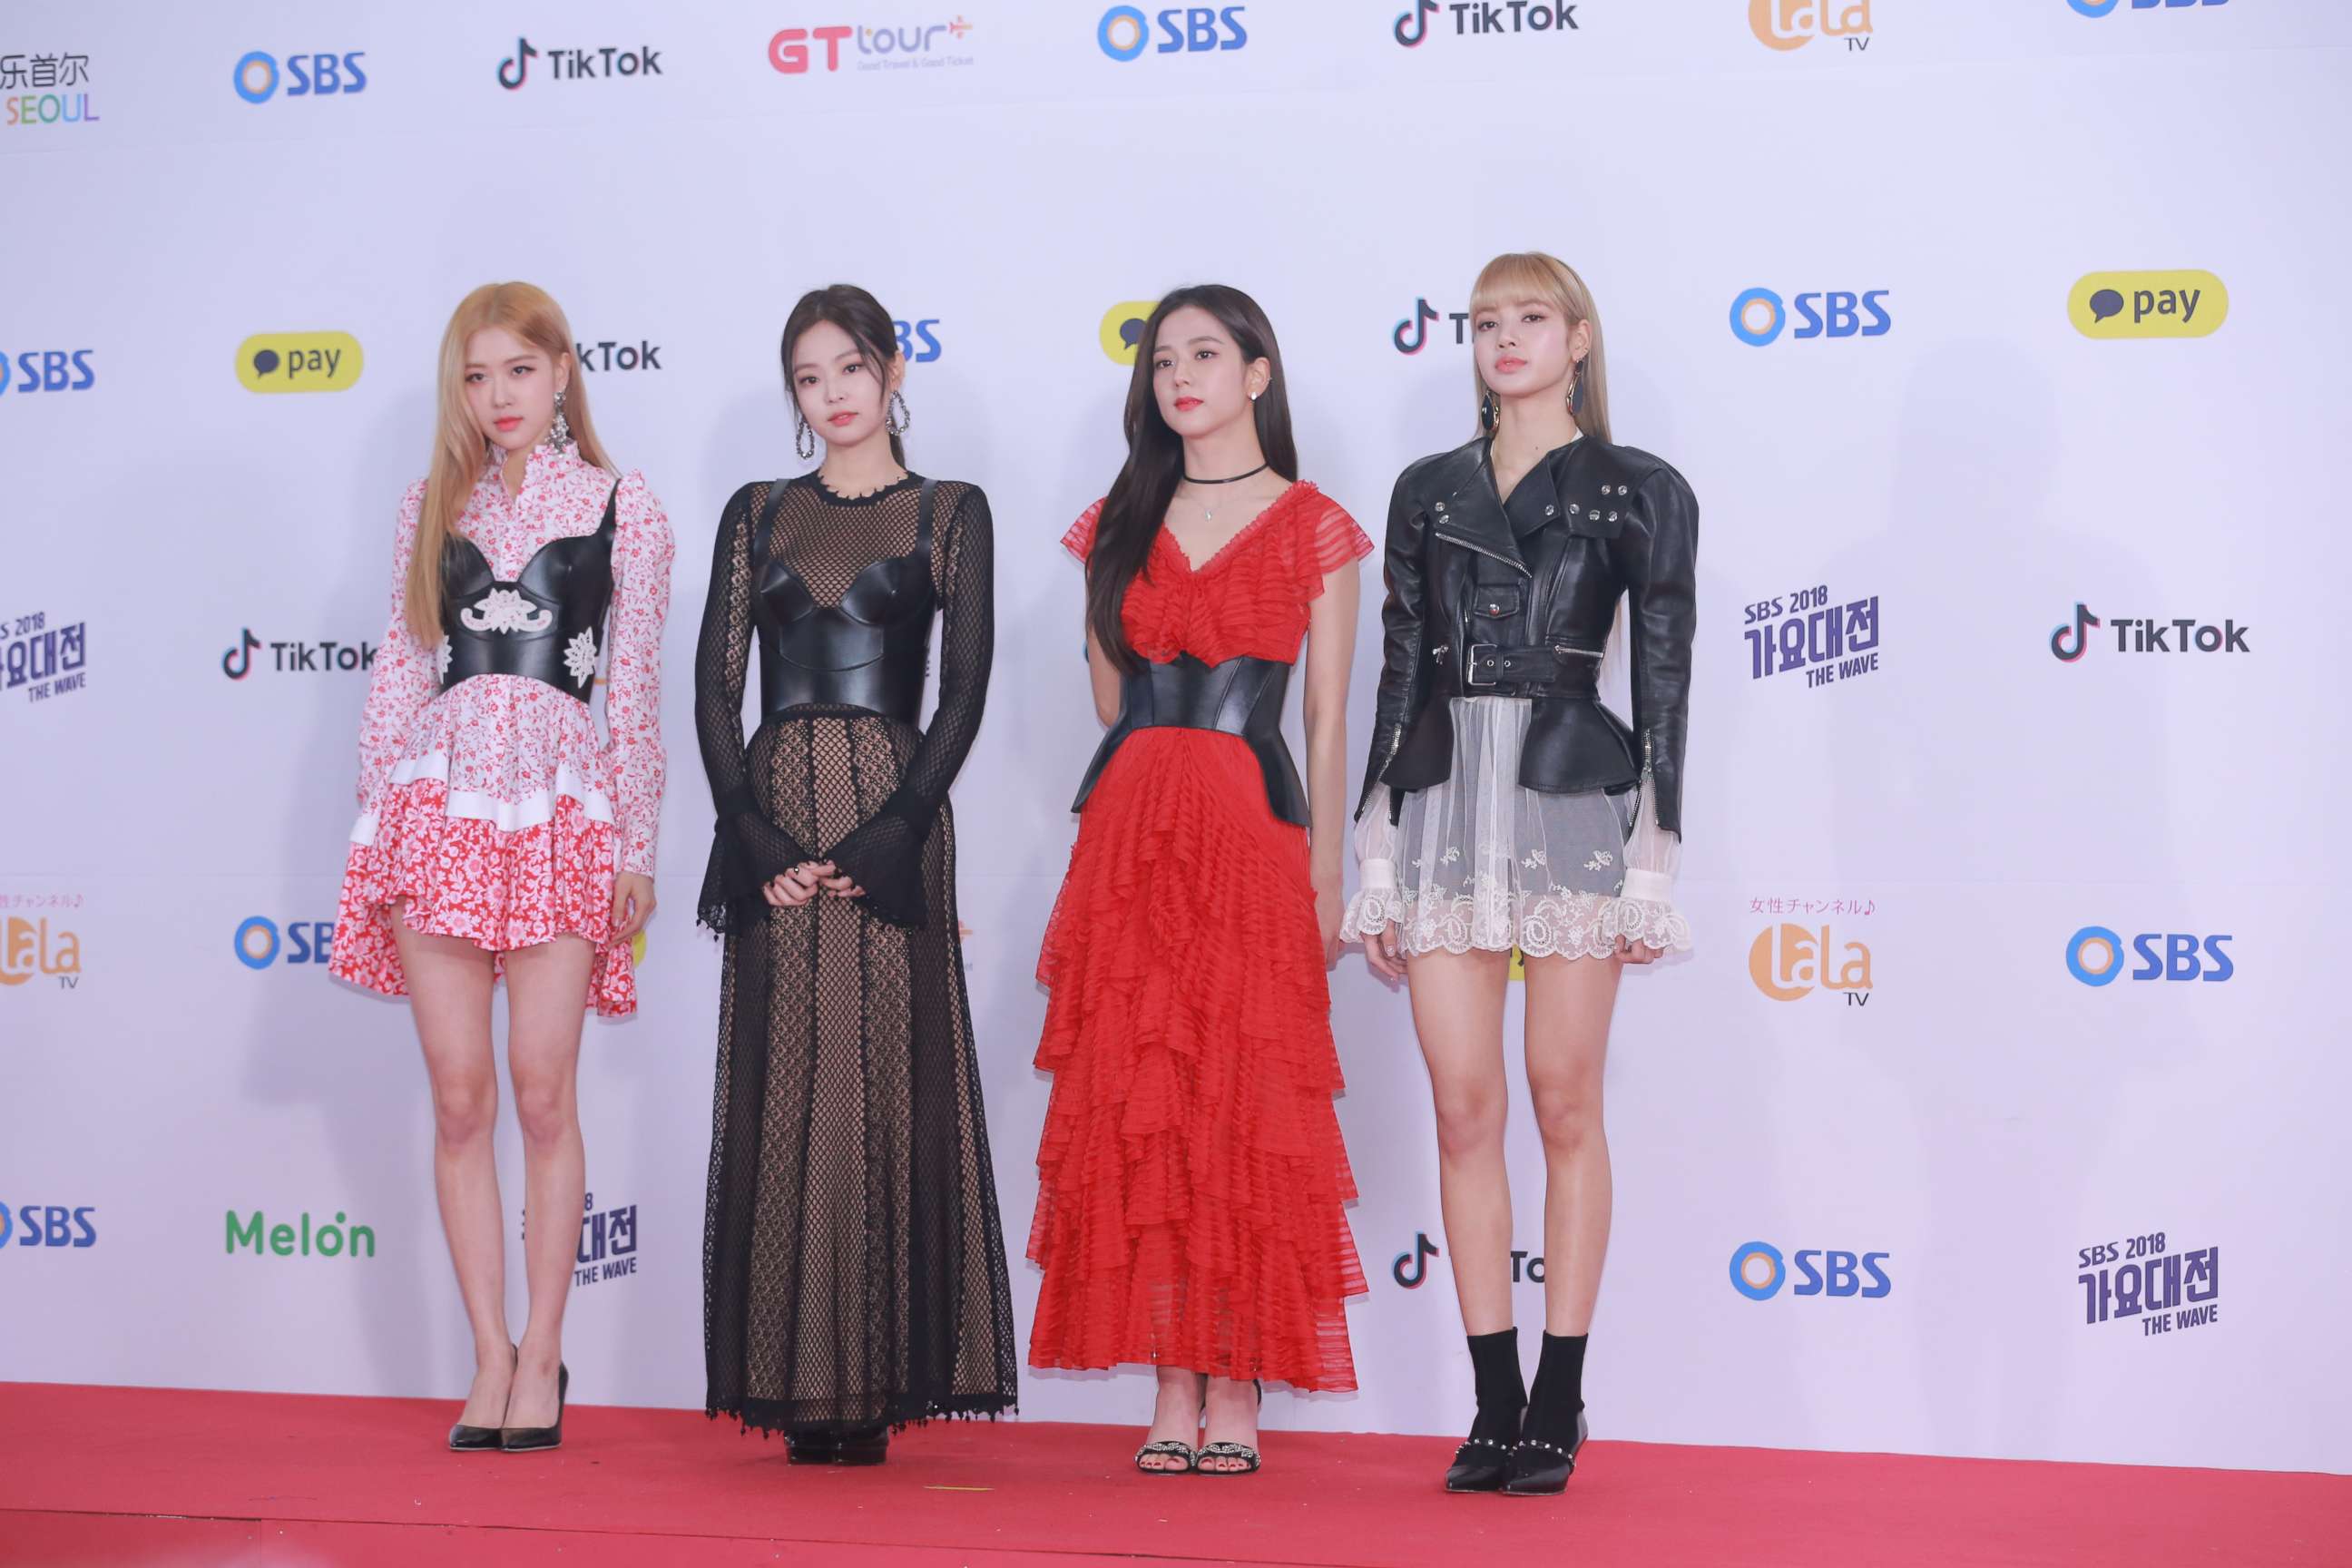 PHOTO: Members of South Korean girl group BlackPink attend a singing competition on Dec. 25, 2018 in Seoul, South Korea.